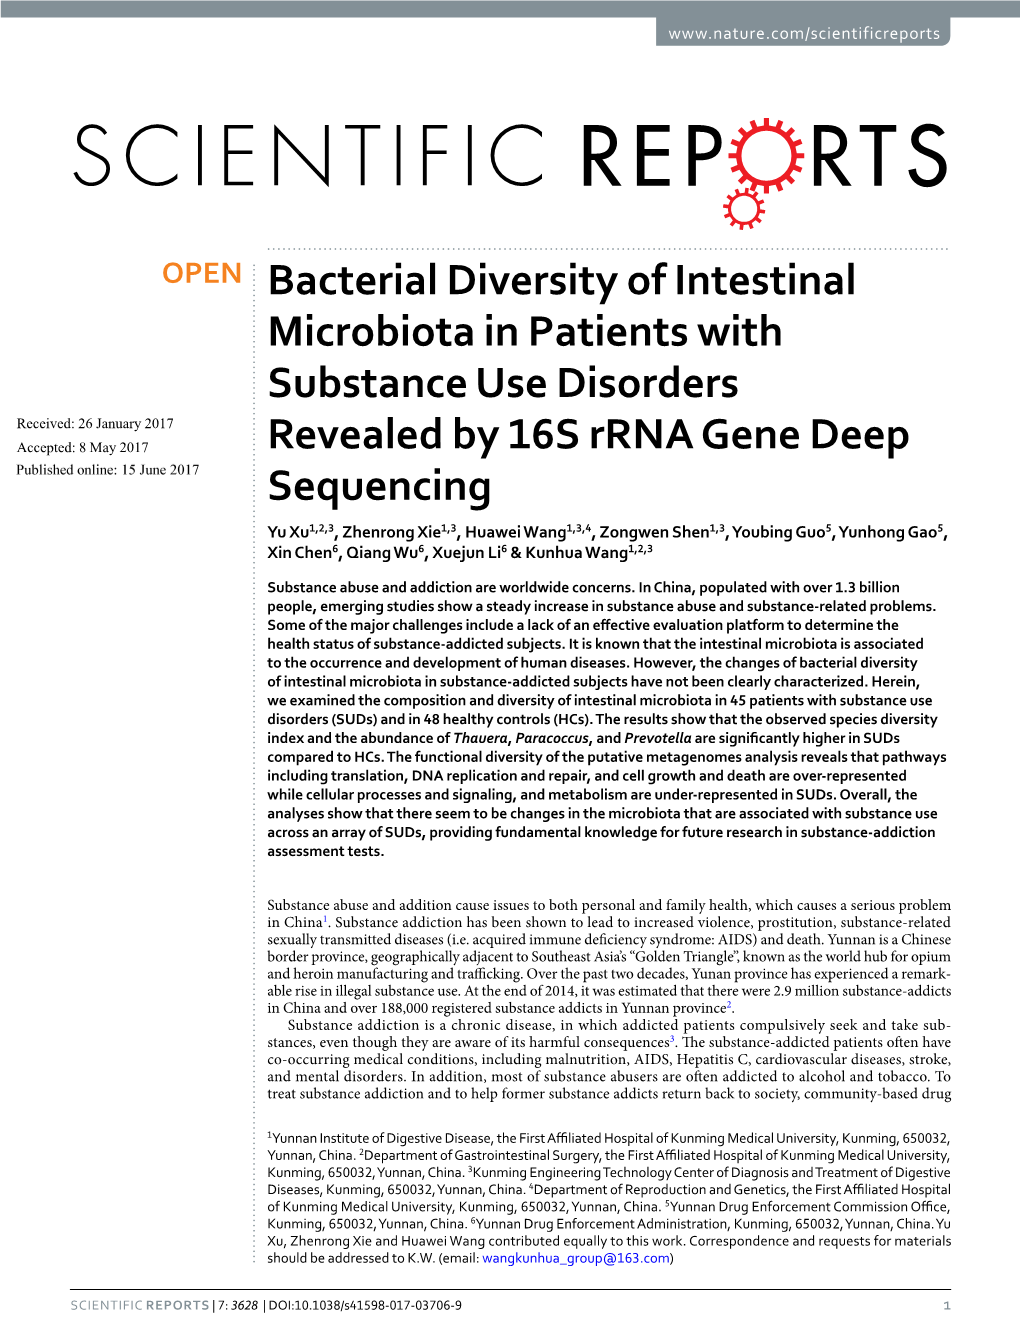 Bacterial Diversity of Intestinal Microbiota in Patients With